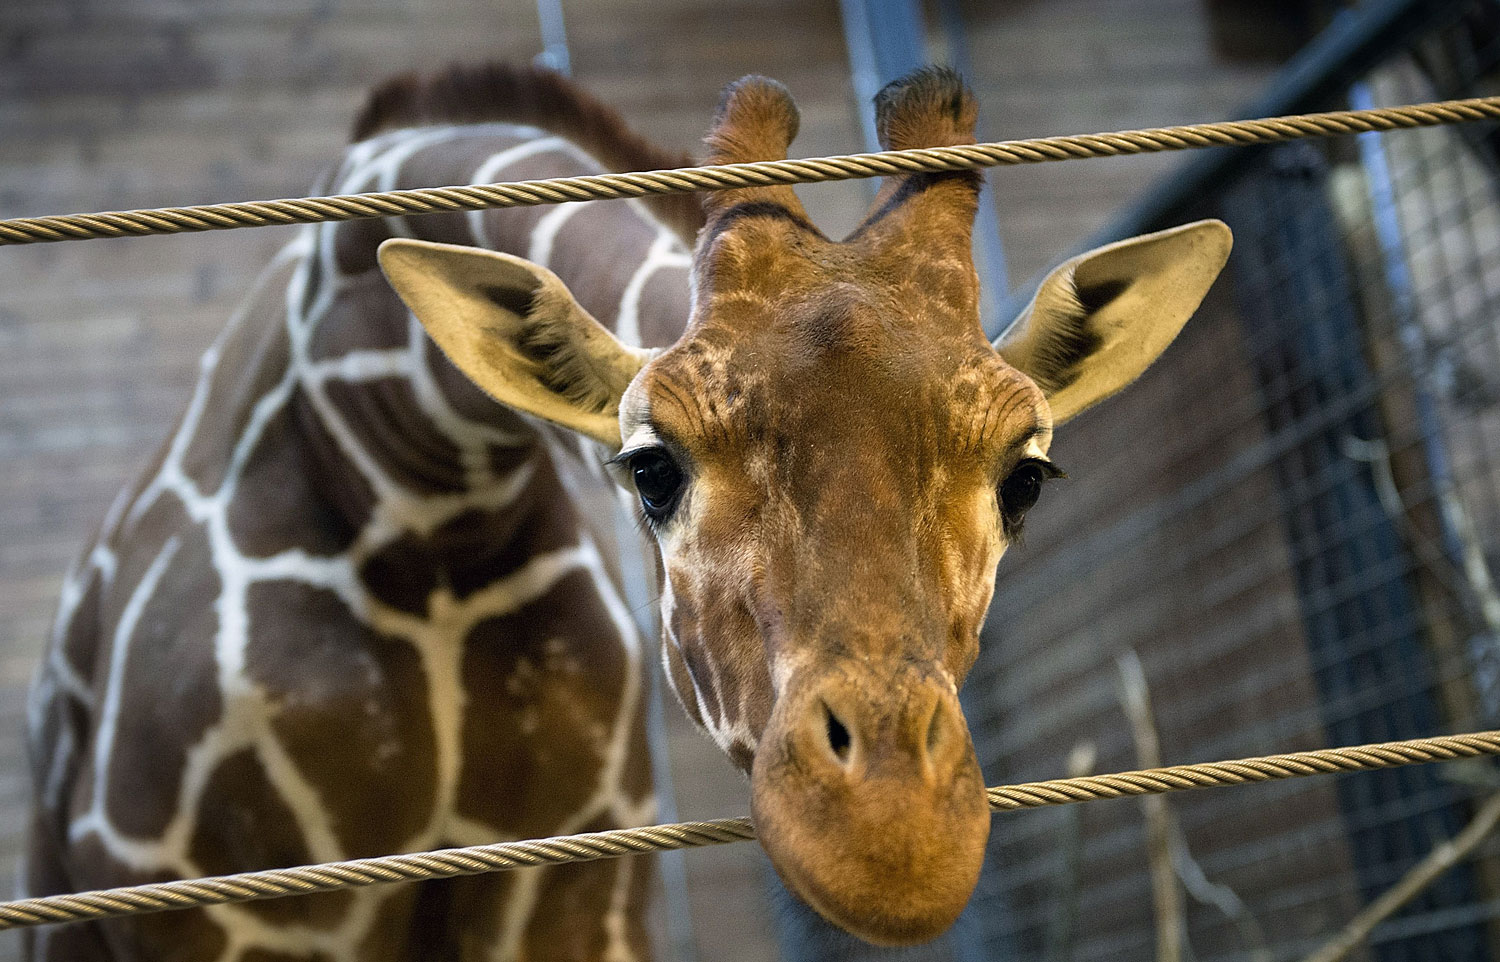 Marius the giraffe at the Copenhagen Zoo on Feb. 7, 2014, two days before he was shot dead then autopsied in the presence of the zoo's visitors, despite an online petition to save him signed by thousands of animal lovers (Keld Navntoft / AFP / Getty Images)